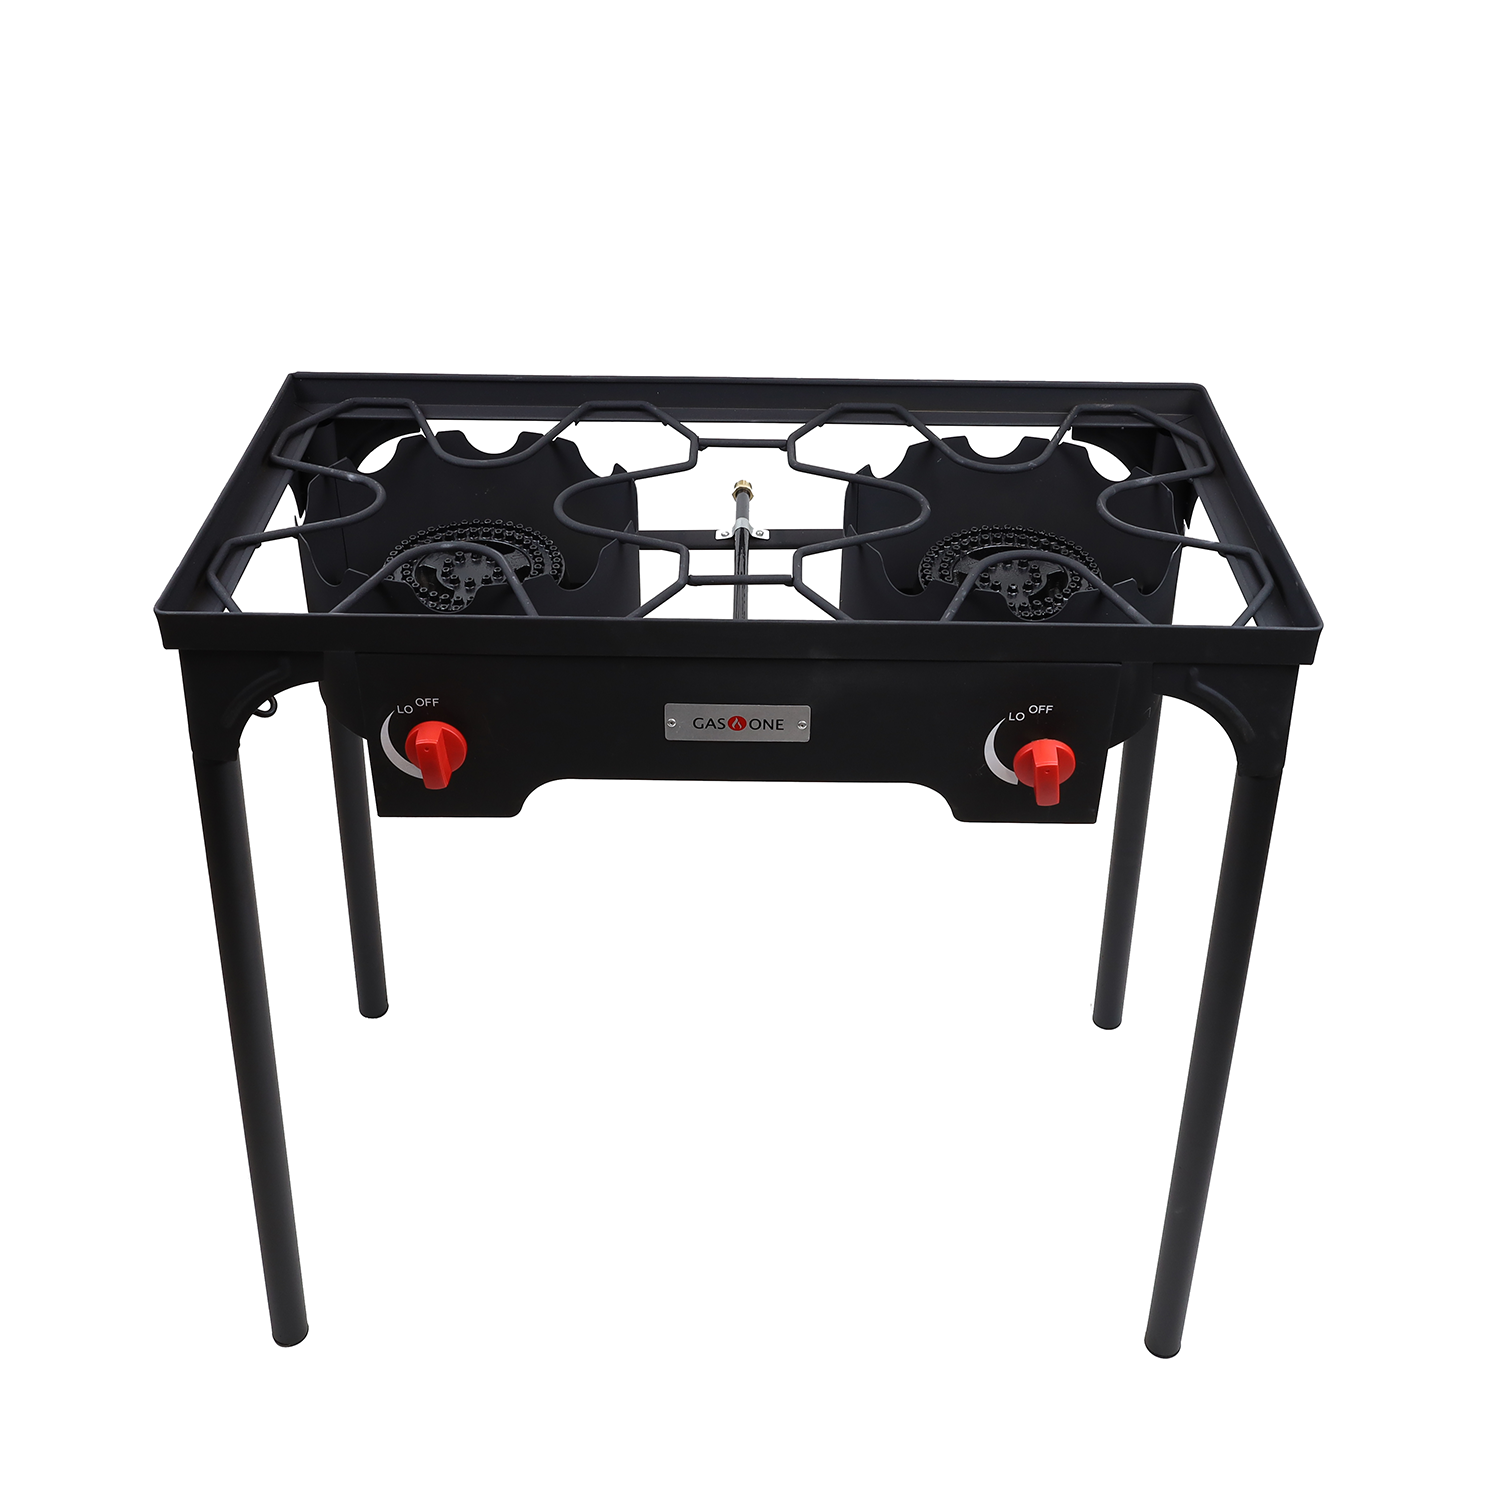 Portable Cooking Double Burner Cast Iron Stove Gas Ring Outdoor